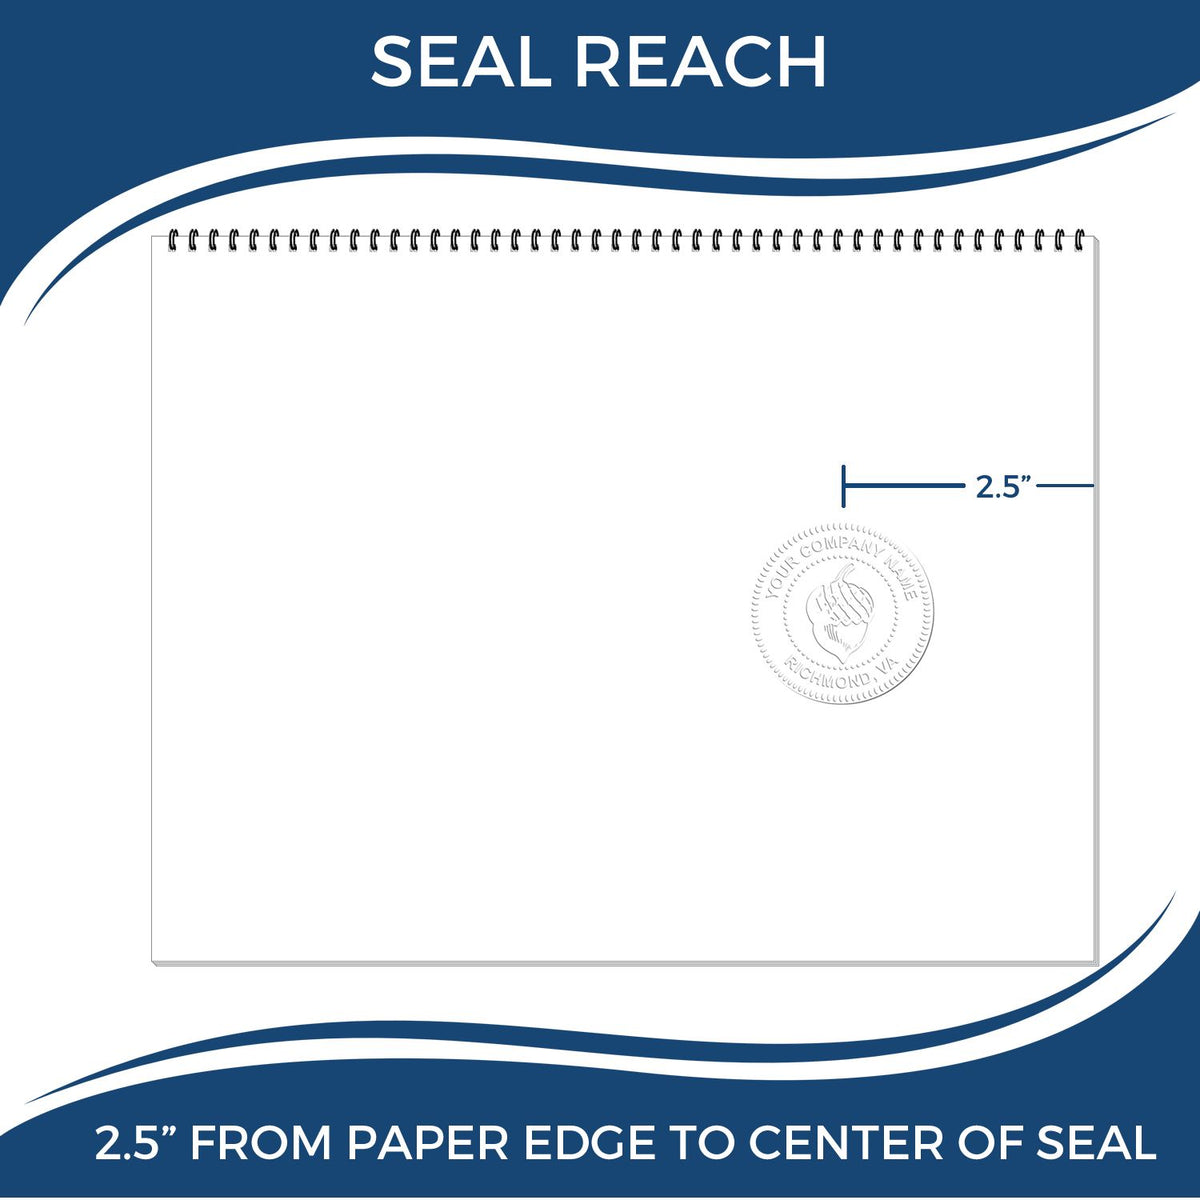 An infographic showing the seal reach which is represented by a ruler and a miniature seal image of the Long Reach Connecticut Land Surveyor Seal